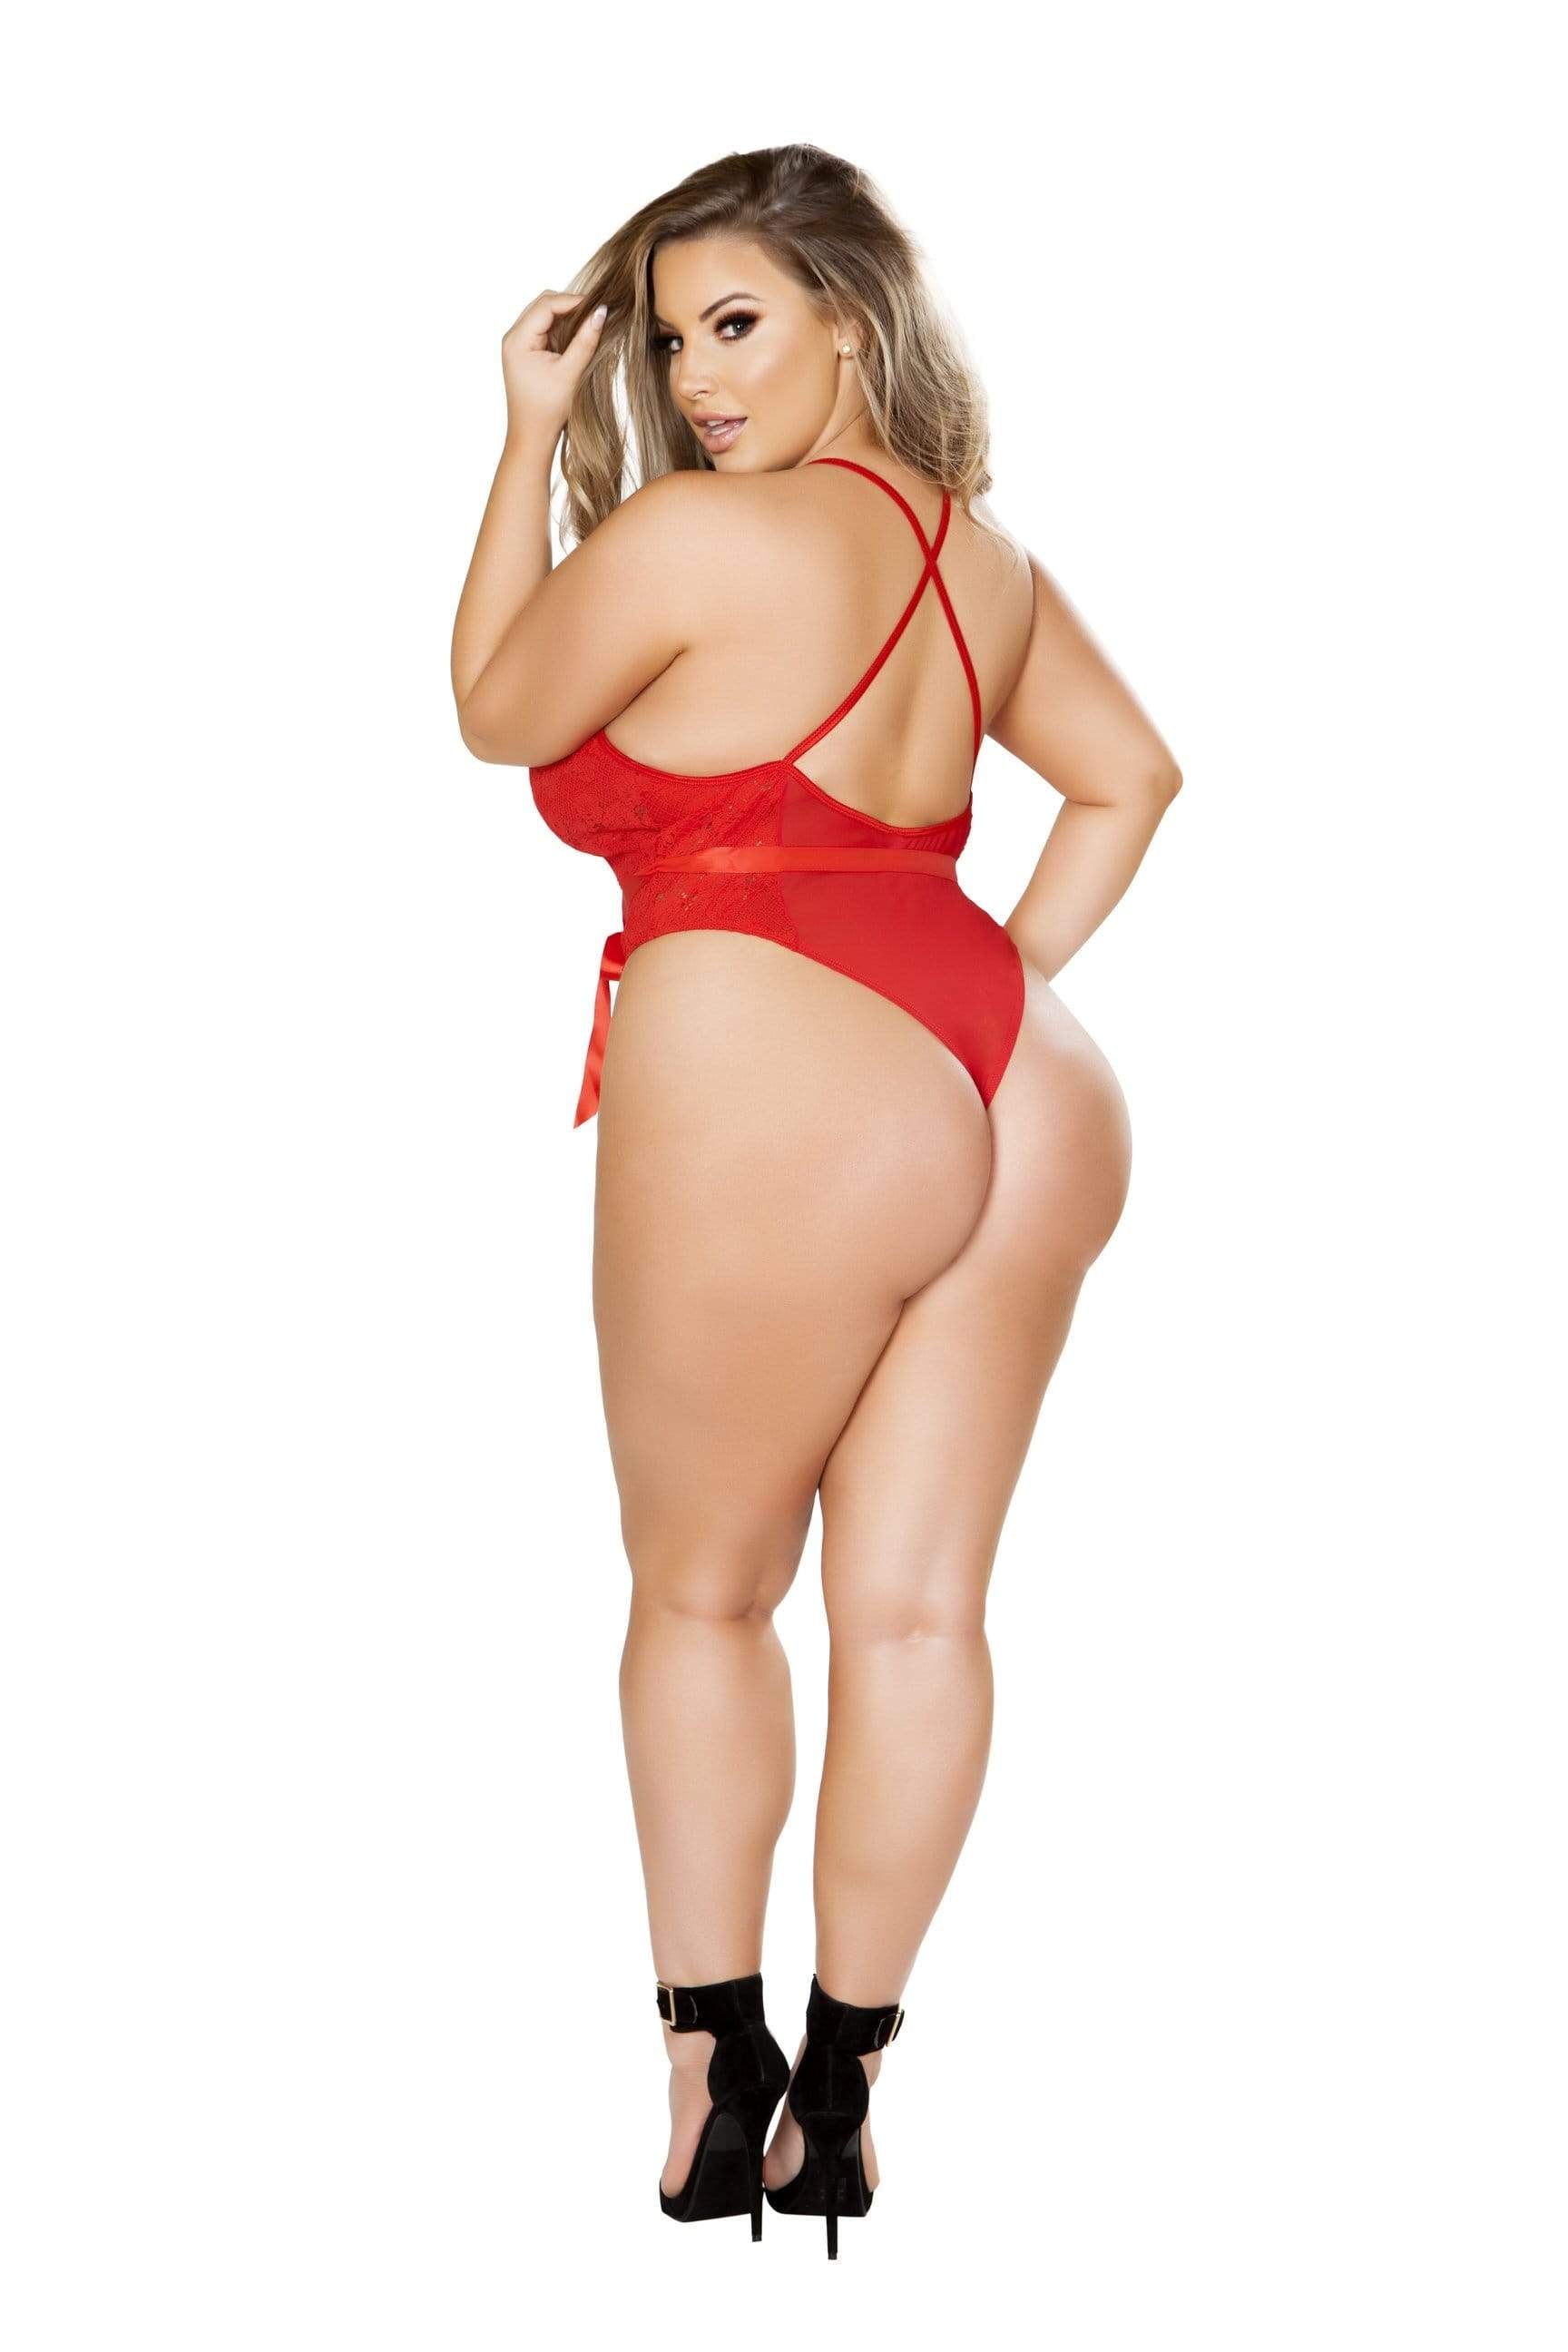 Roma XL/XXL / Red Red Sheer Bow Criss Cross Bow Teddy (Black or Blue also available) SHC-LI217-RED-XL/XXL-R Apparel & Accessories > Clothing > Underwear & Socks > Lingerie